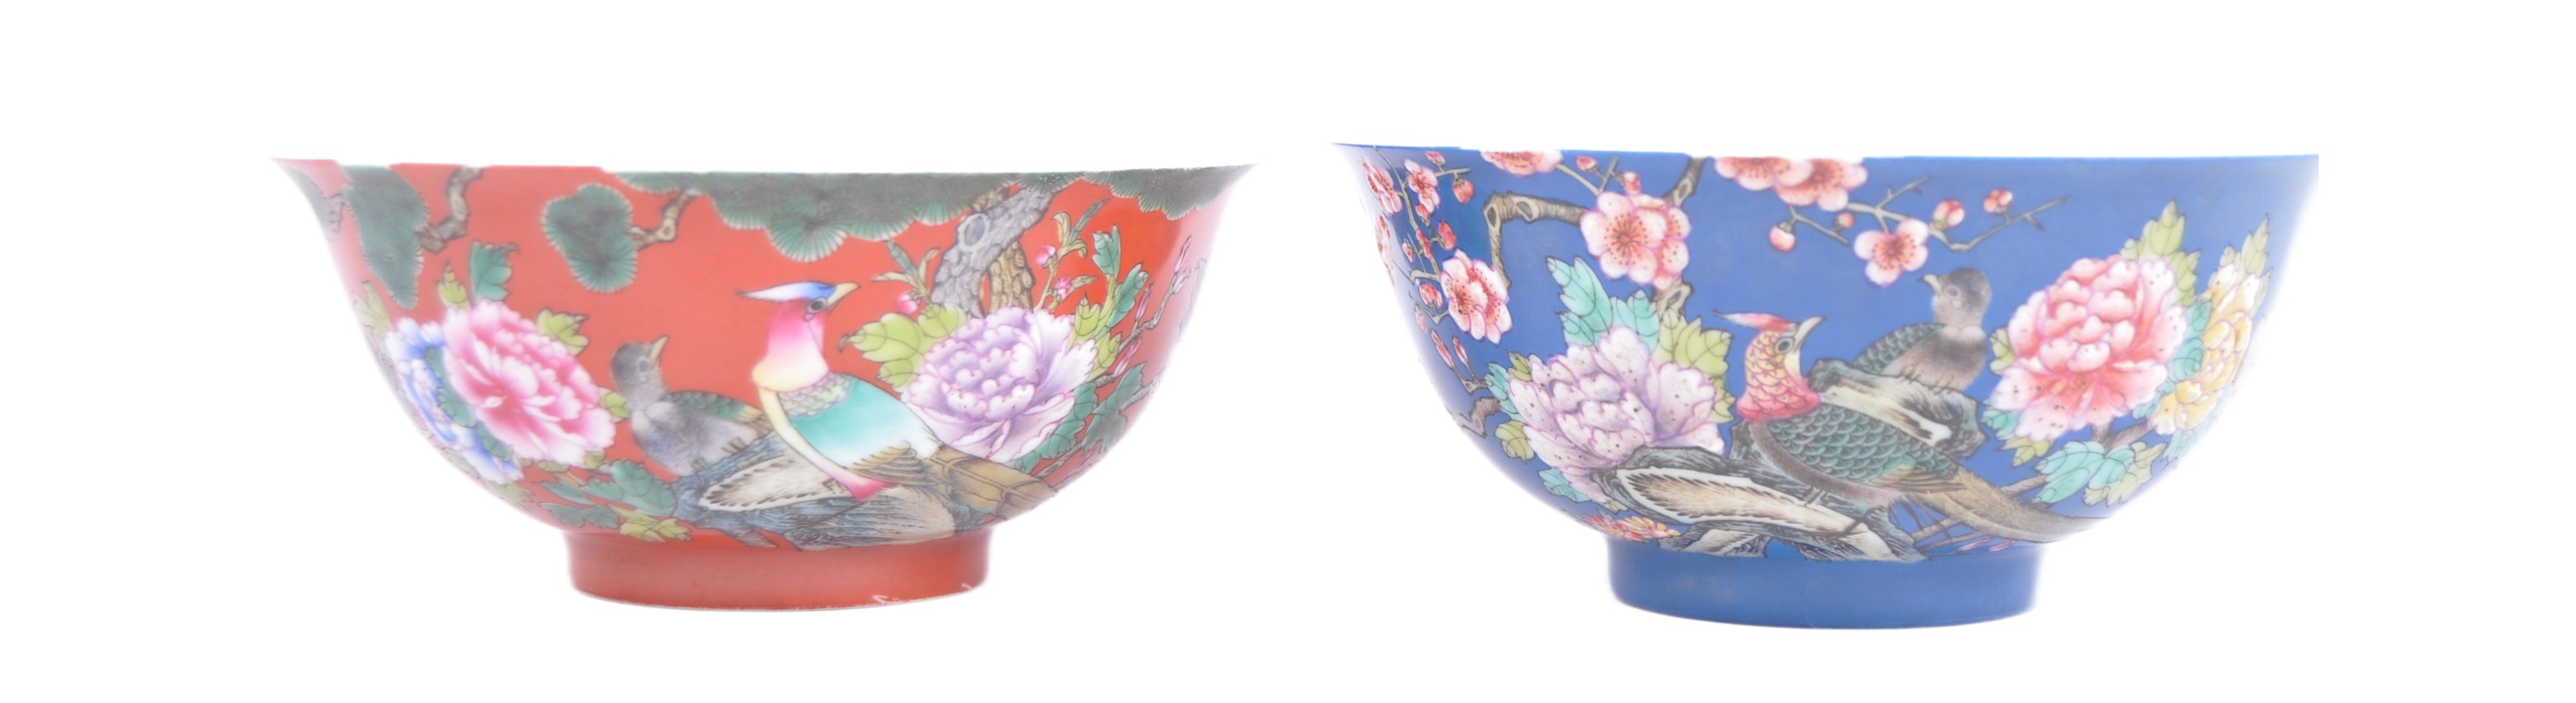 PAIR OF 20TH CENTURY CHINESE REPUBLIC PORCELAIN BOWLS